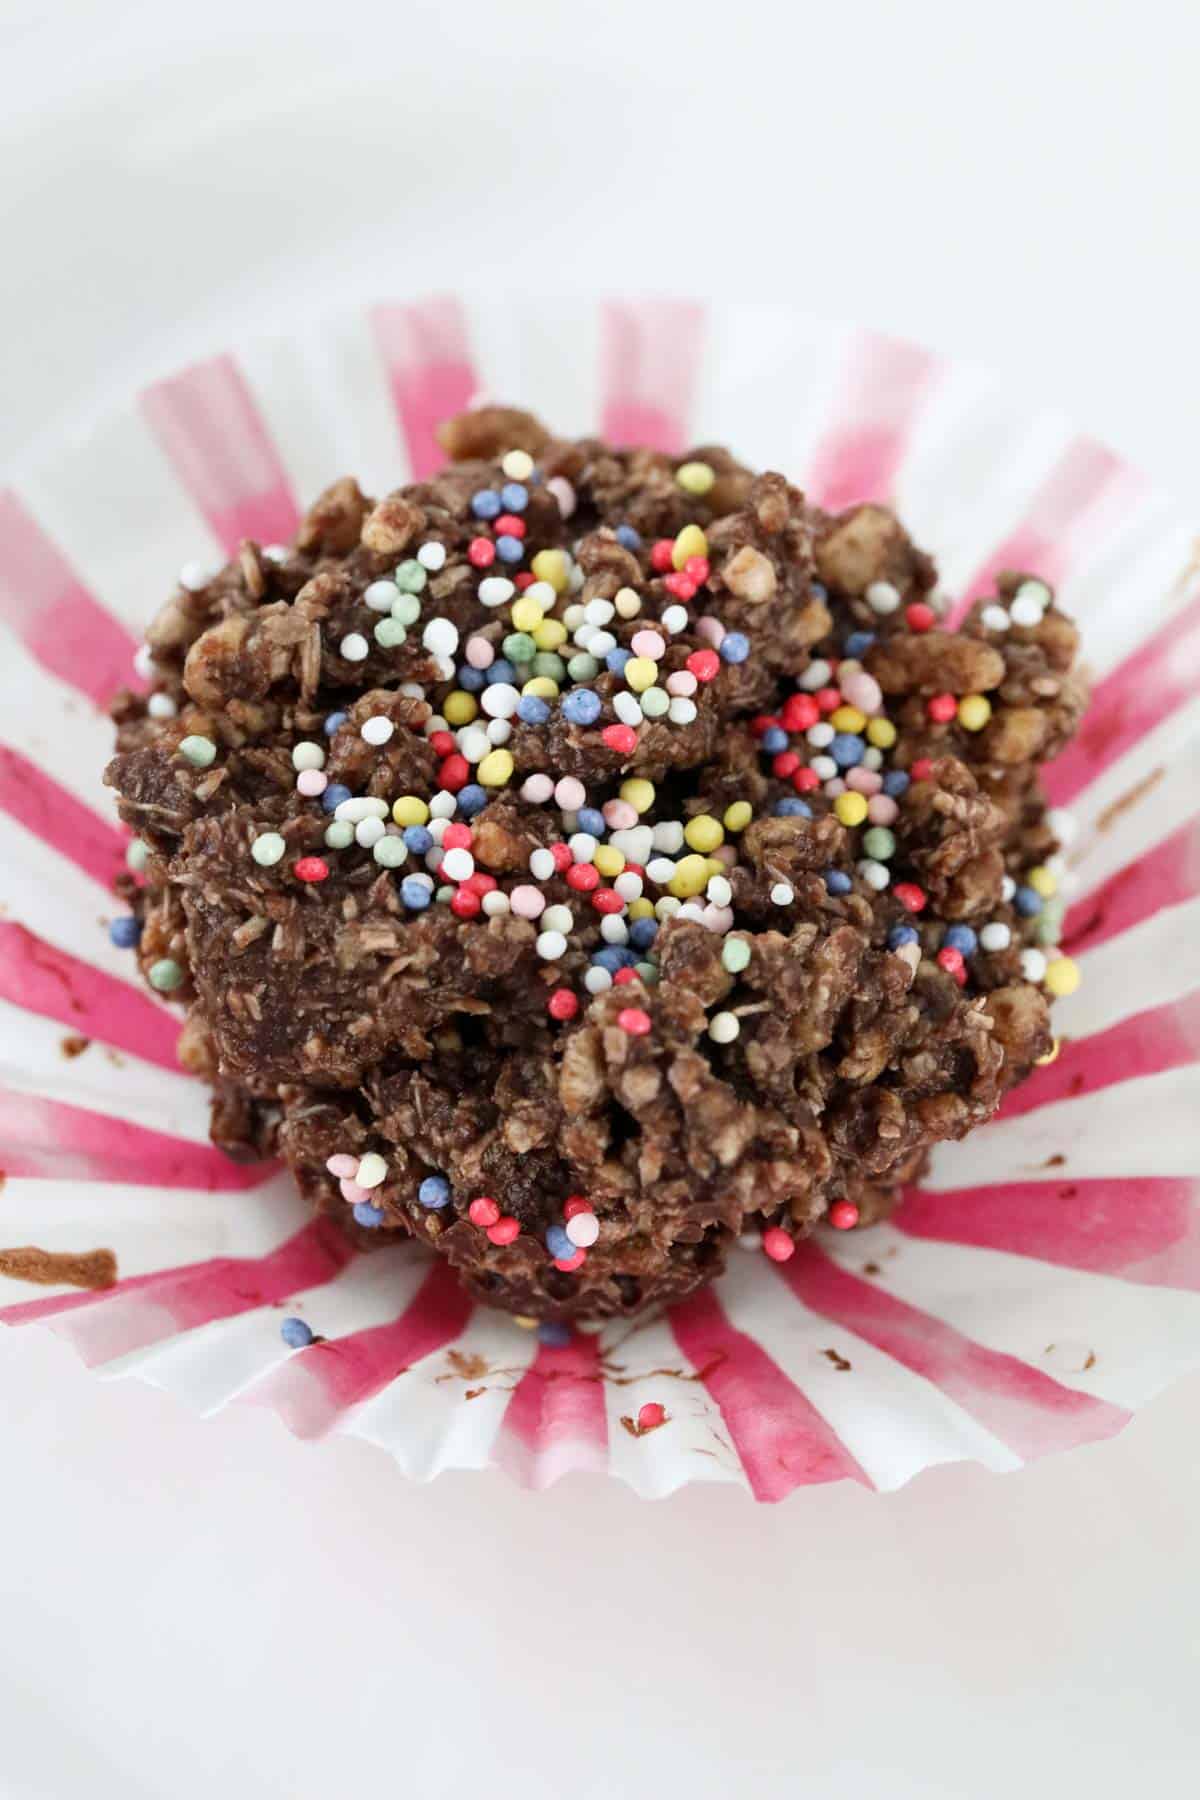 A chocolate crackle with sprinkles on top.